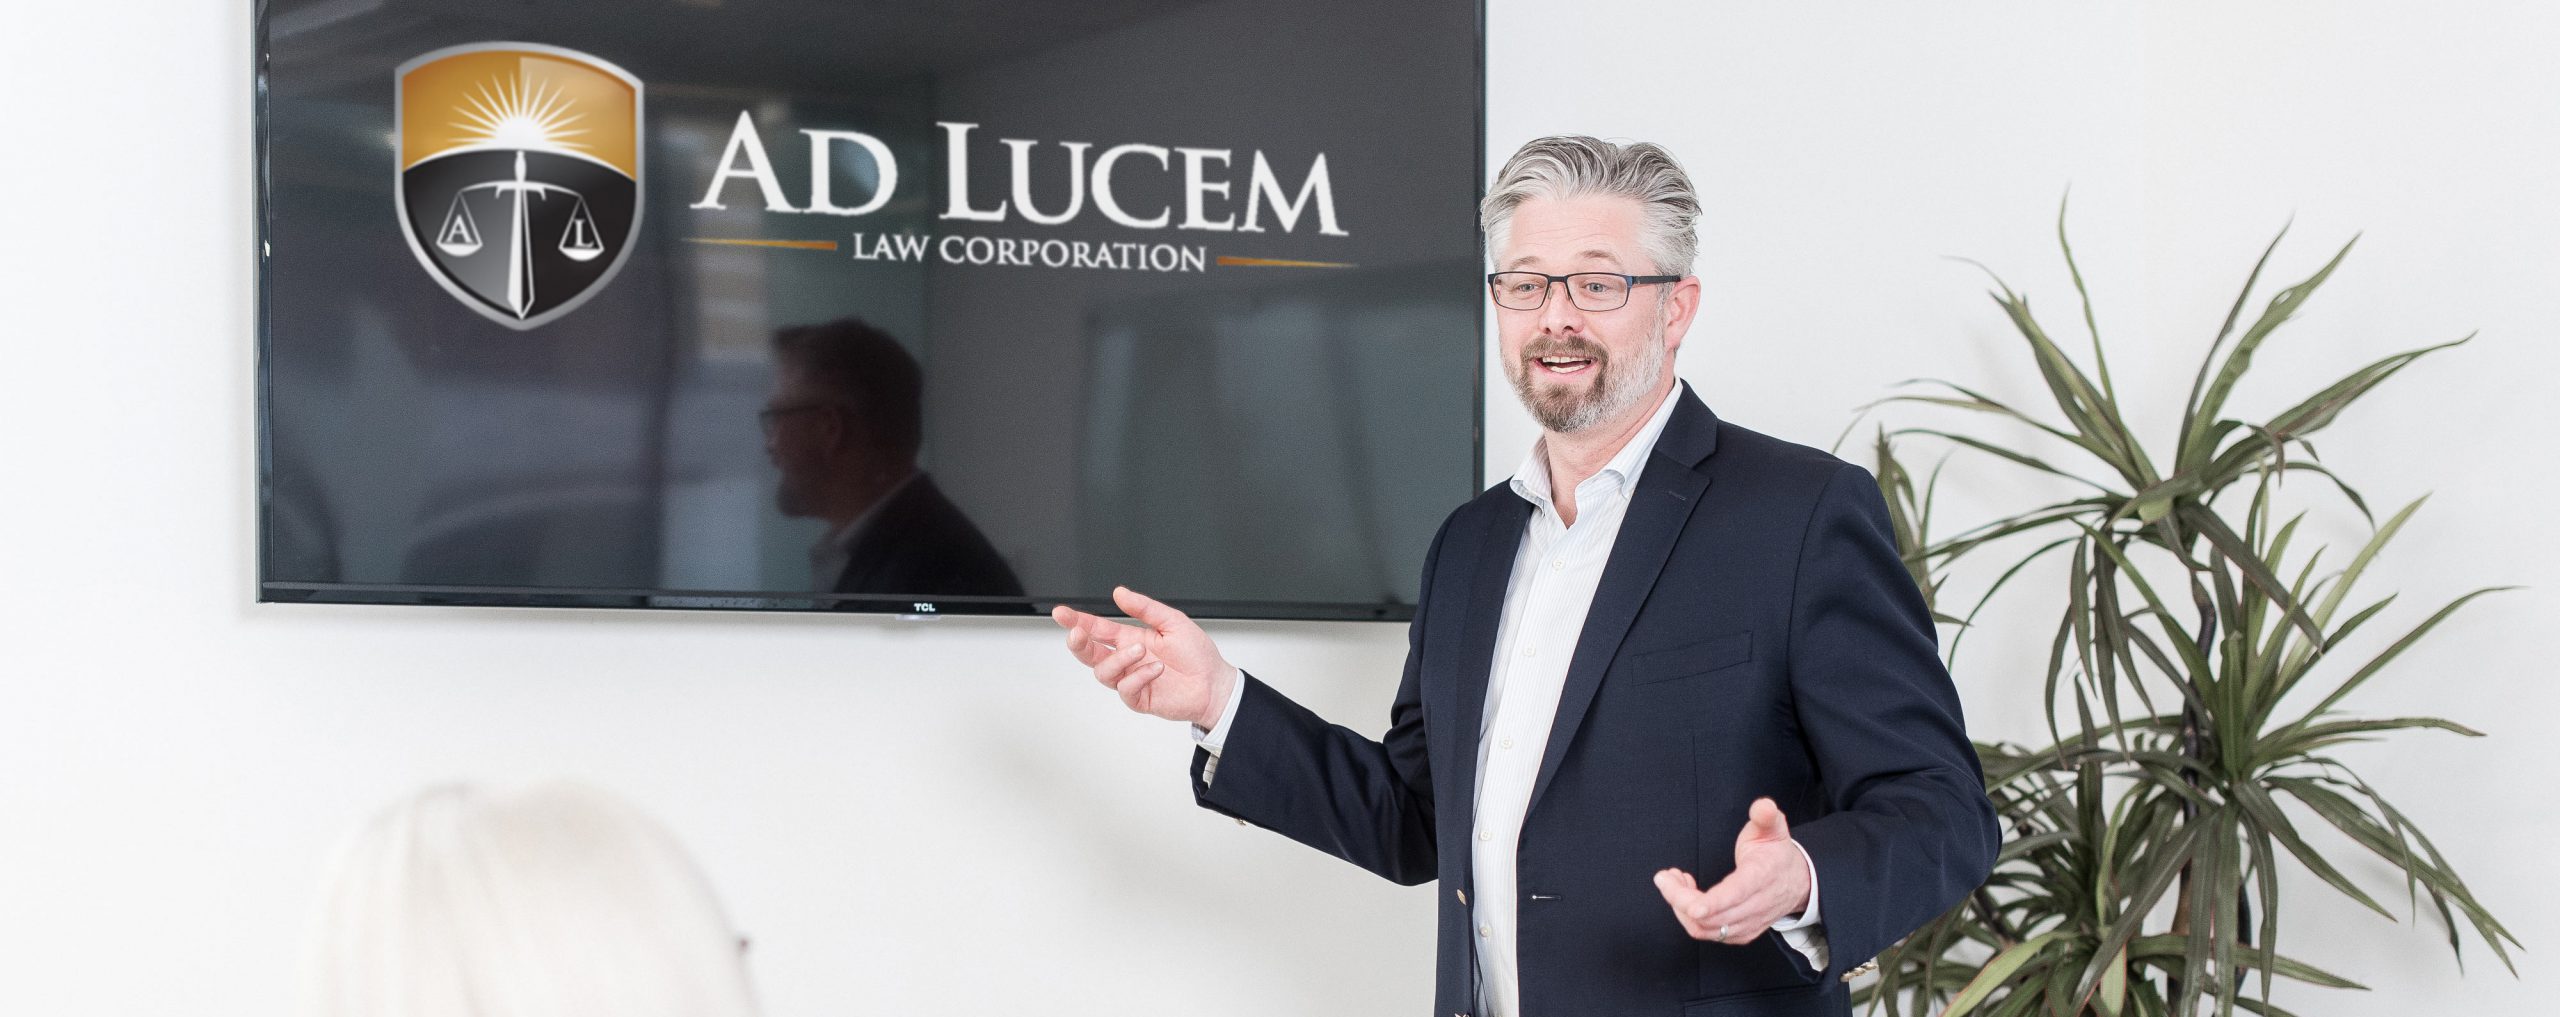 ad lucem consulting services